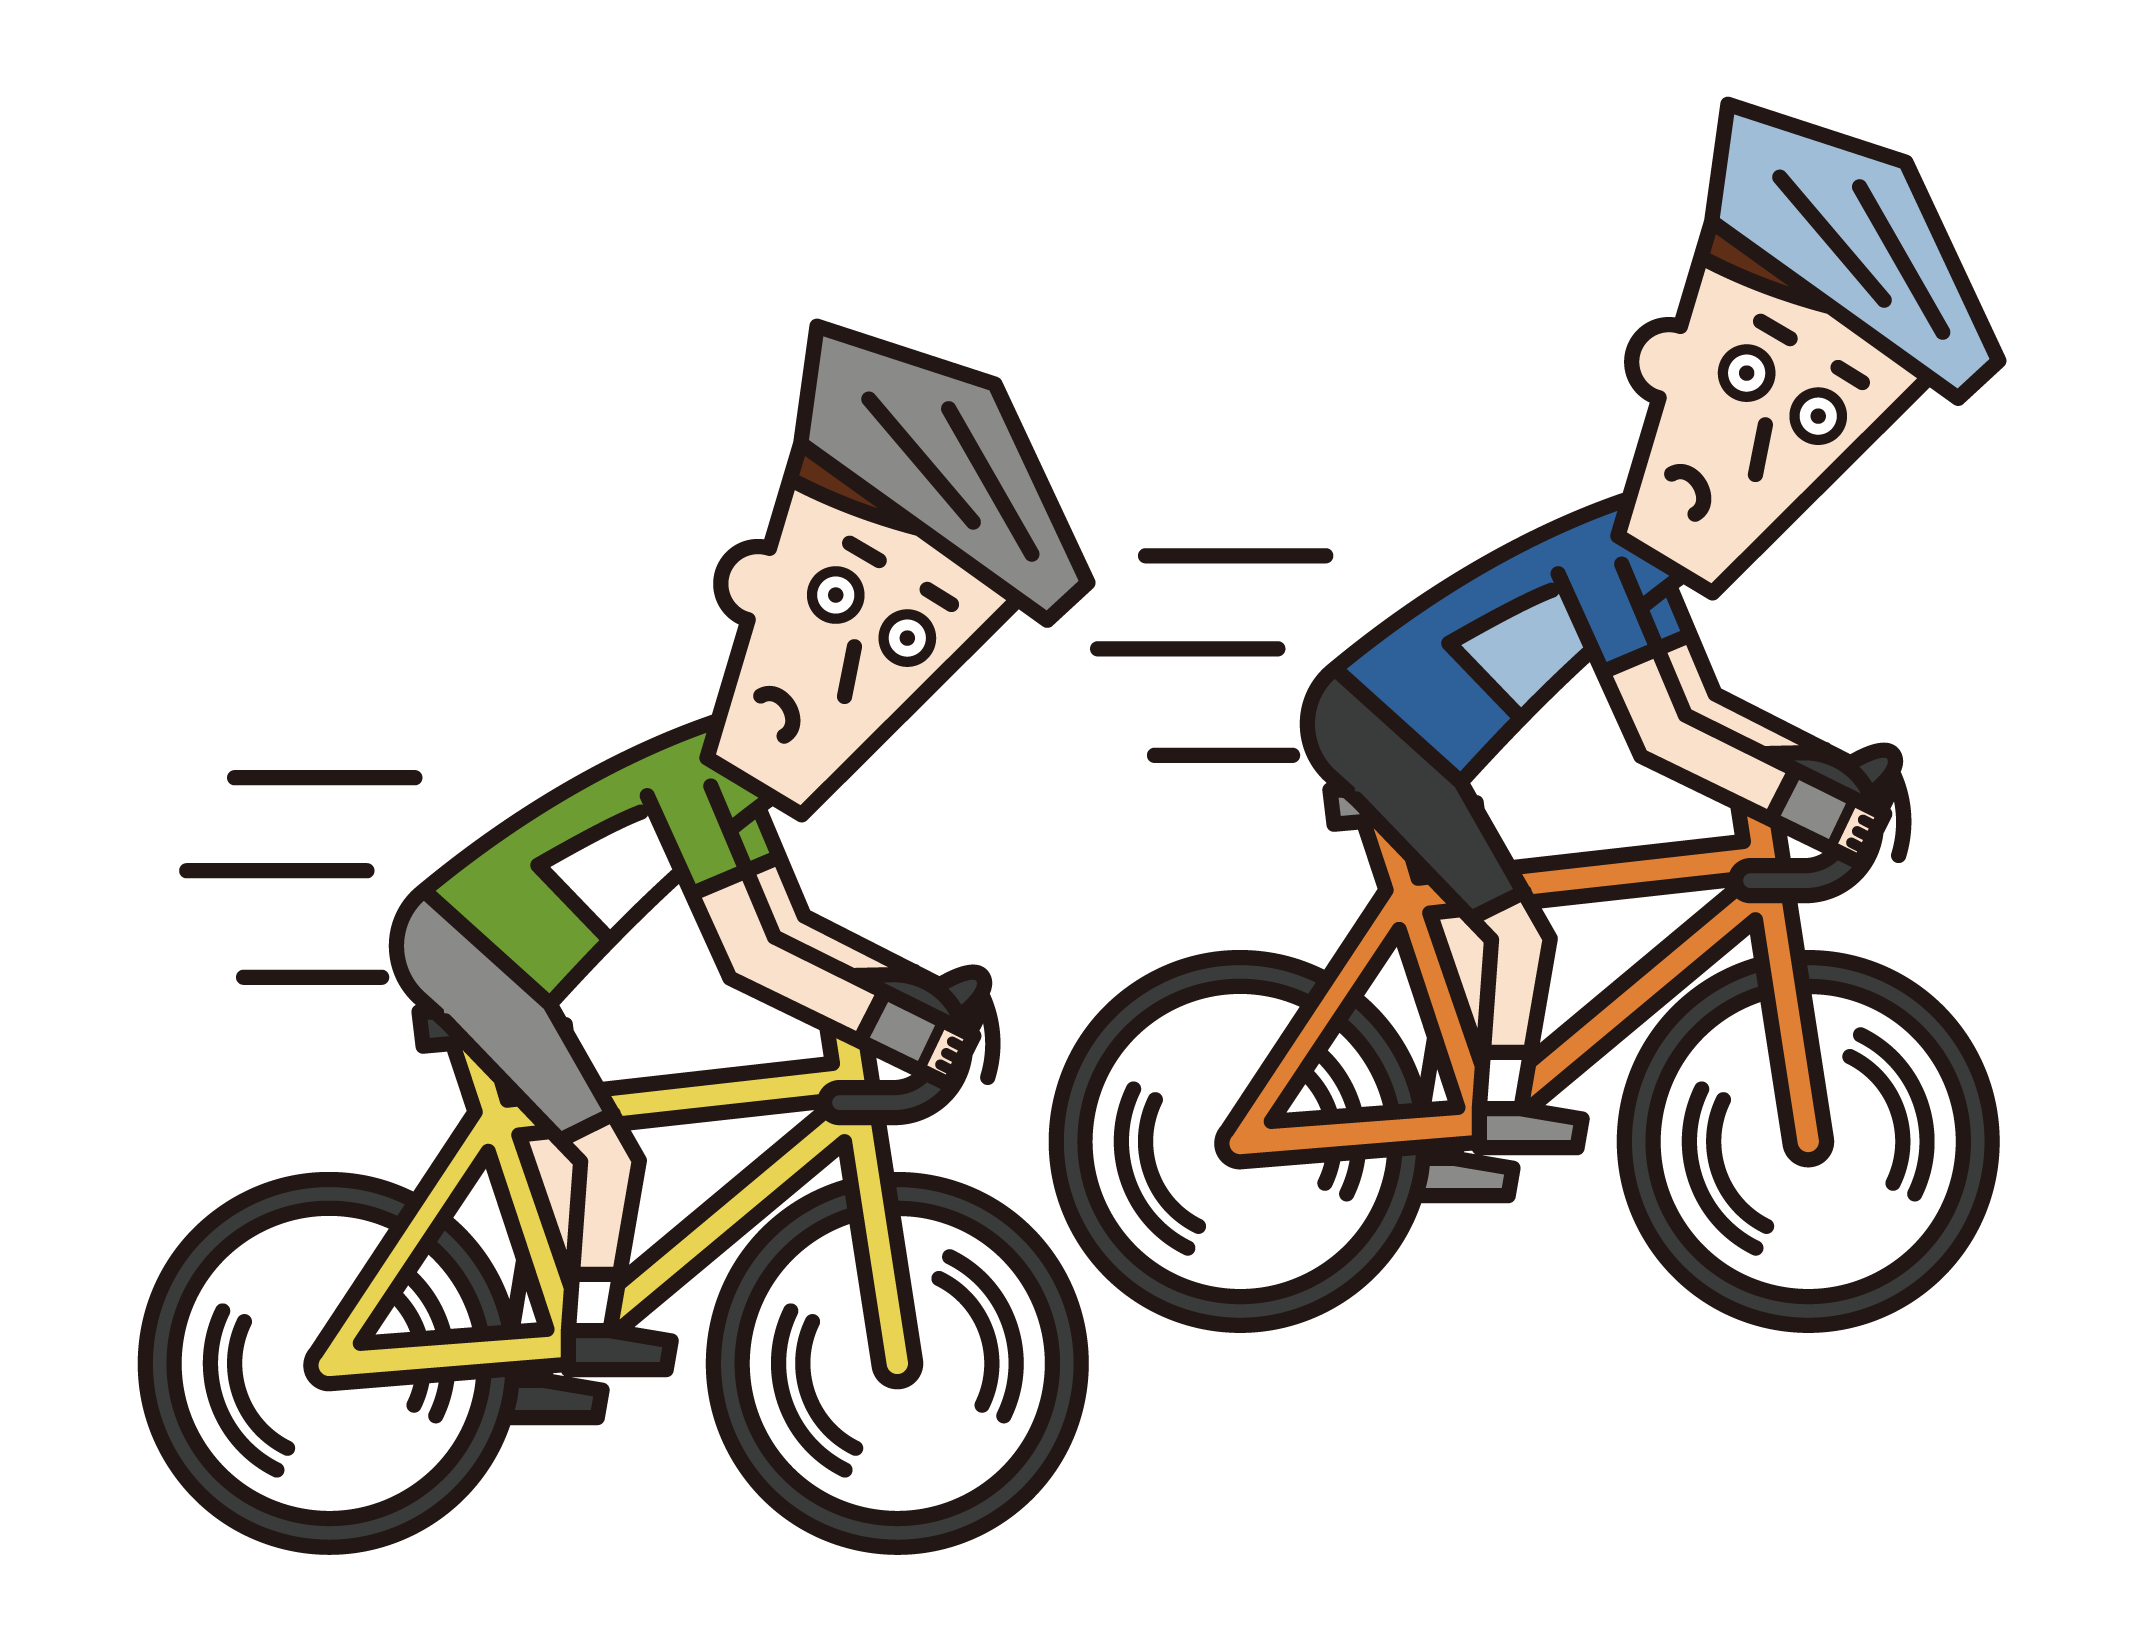 Illustration of road racers (male) racing